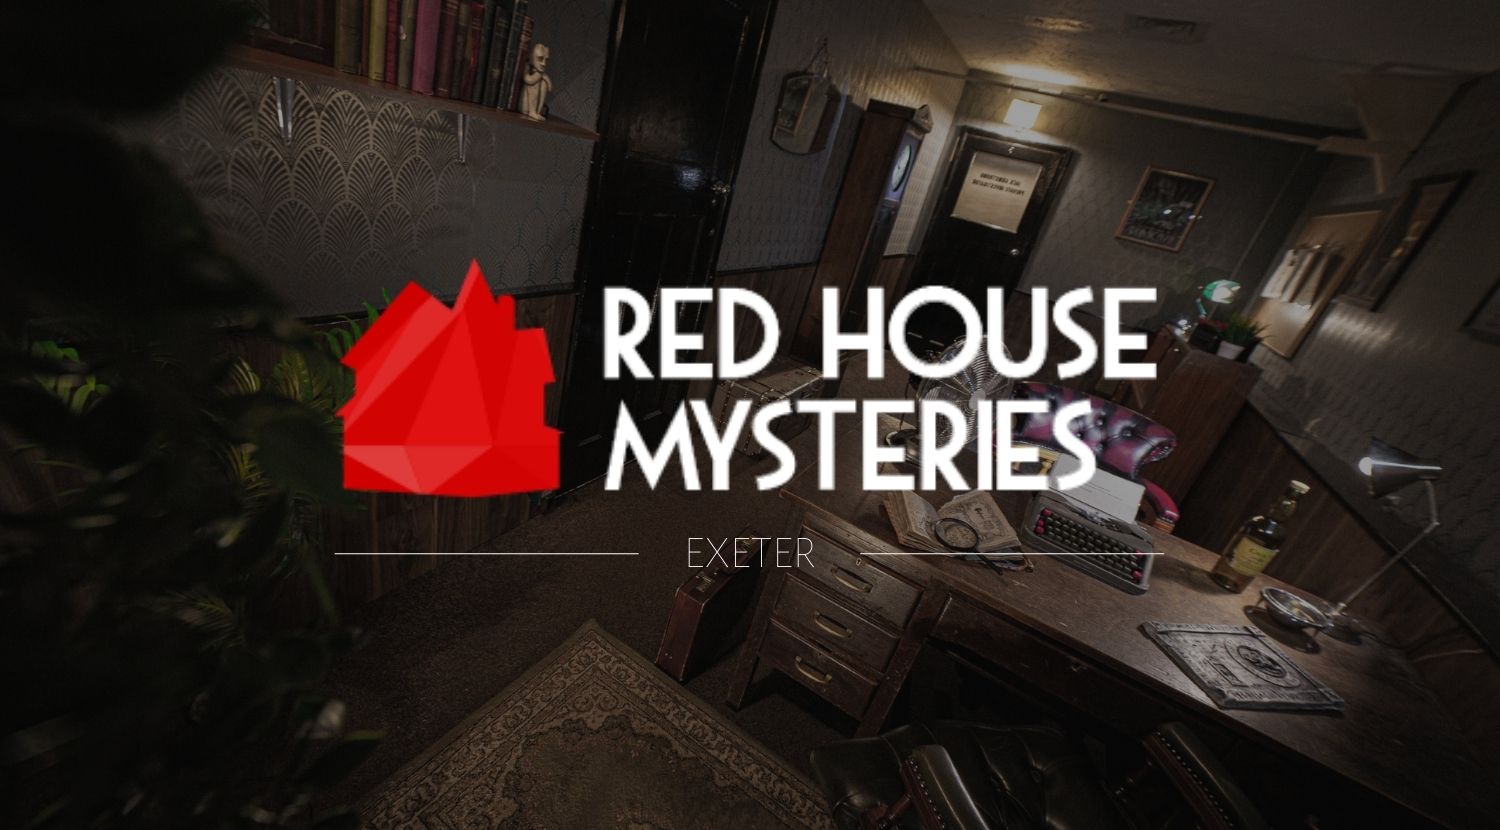 Red-House-Mysteries-Exeter-Cover